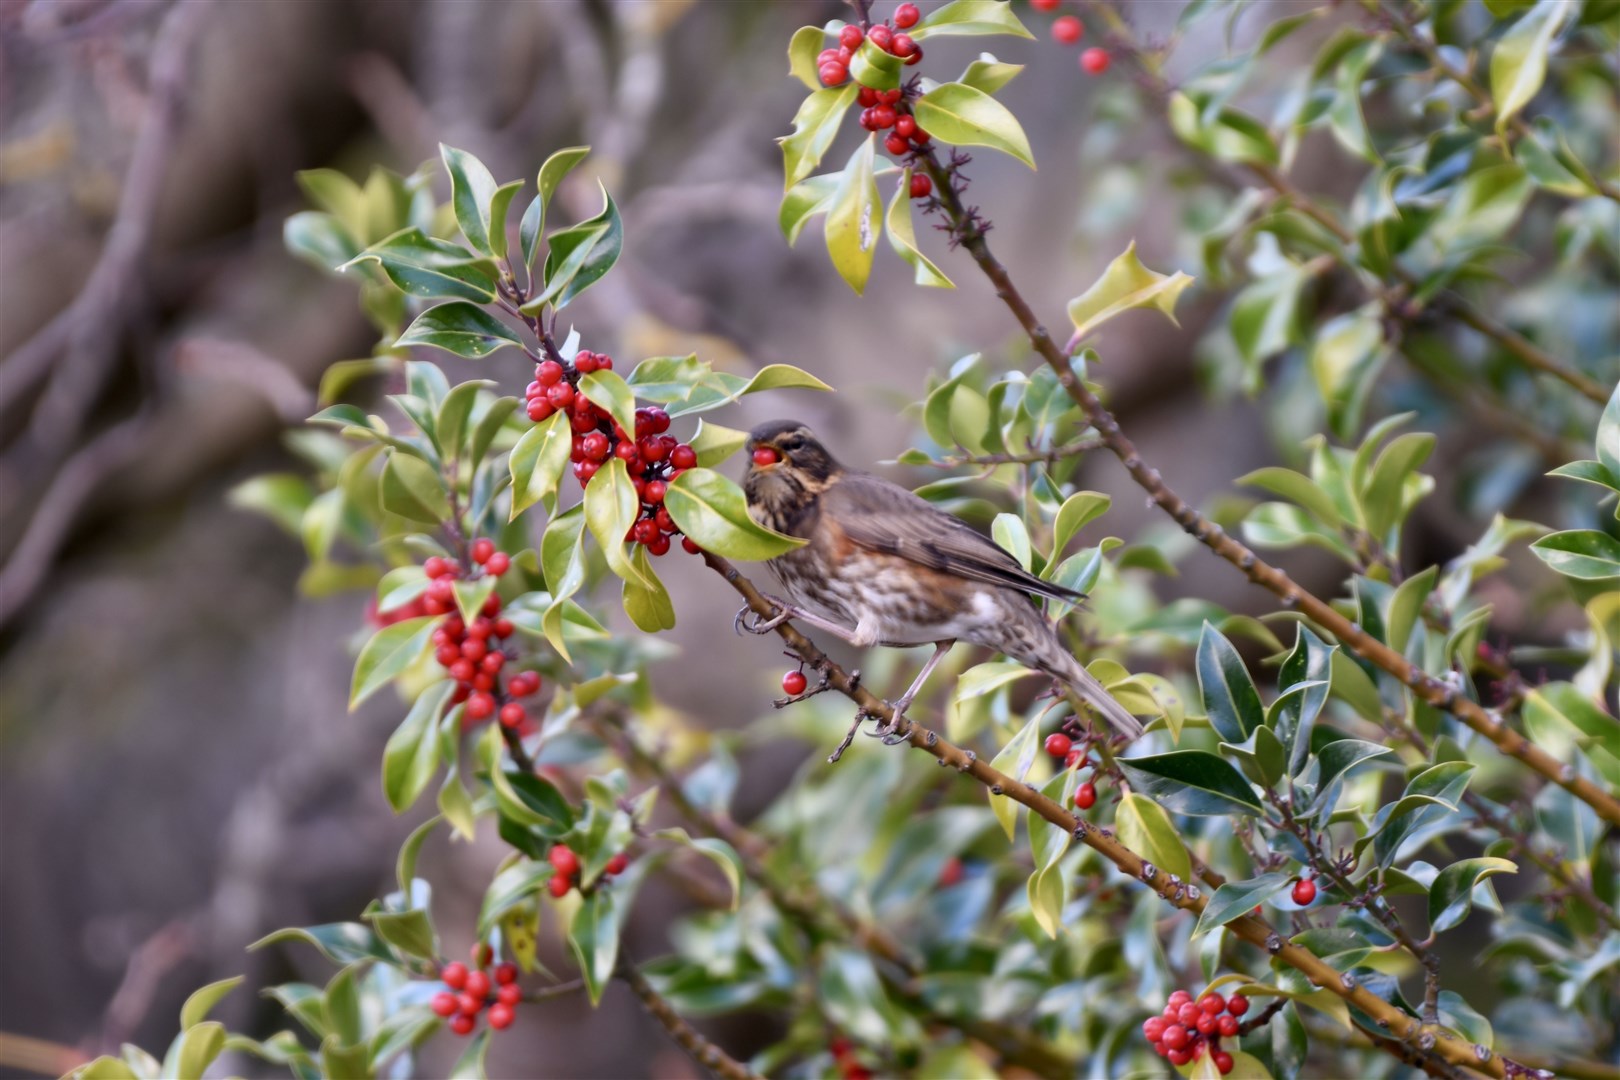 Hazel Thomson took these pictures of redwings enjoying berries on a tree in Elgin.